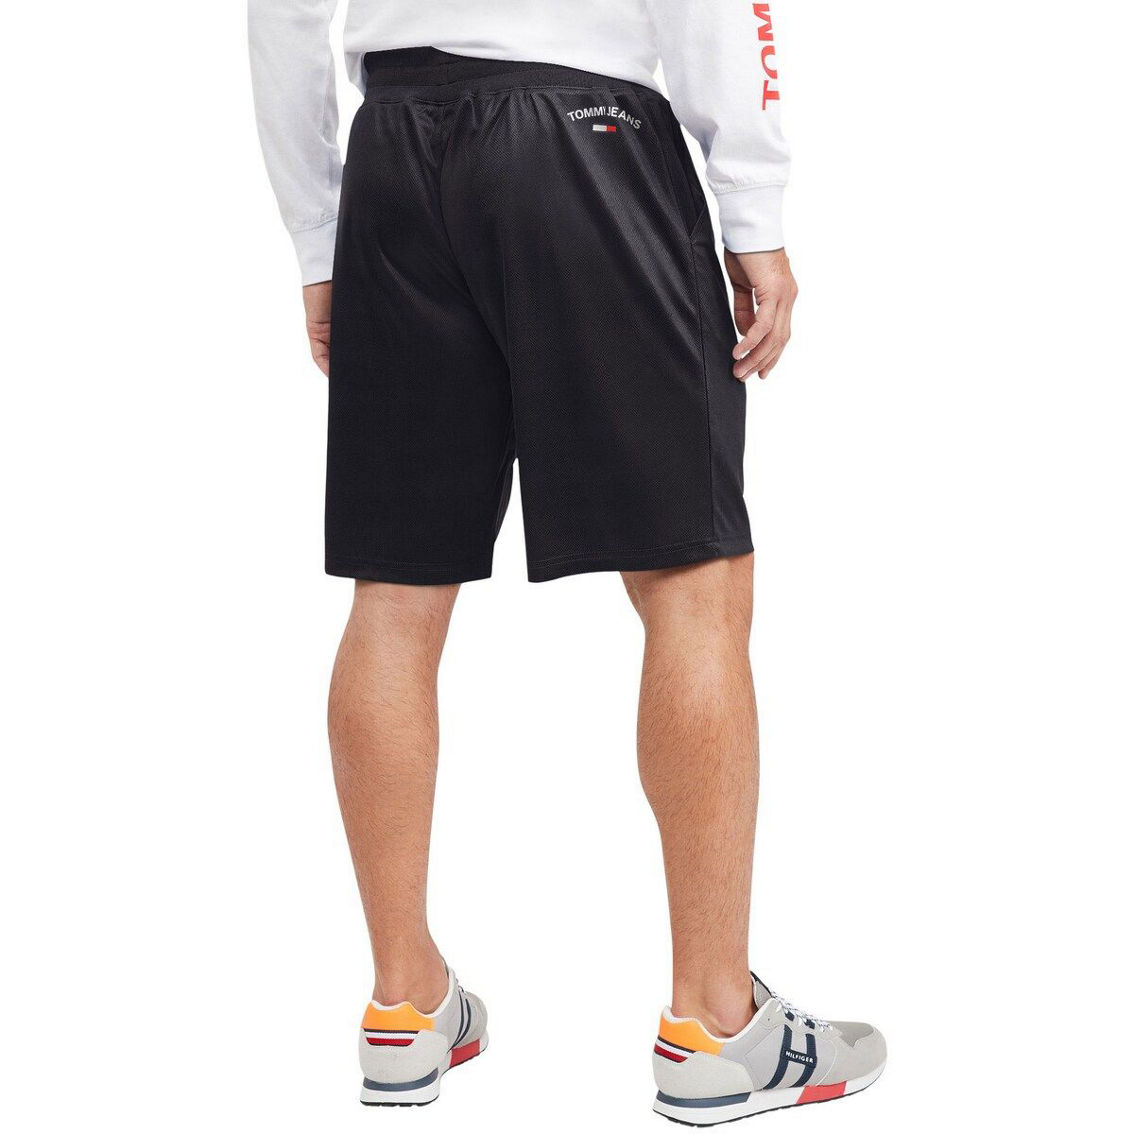 Tommy Jeans Men's Black Miami Heat Mike Mesh Basketball Shorts - Image 3 of 3